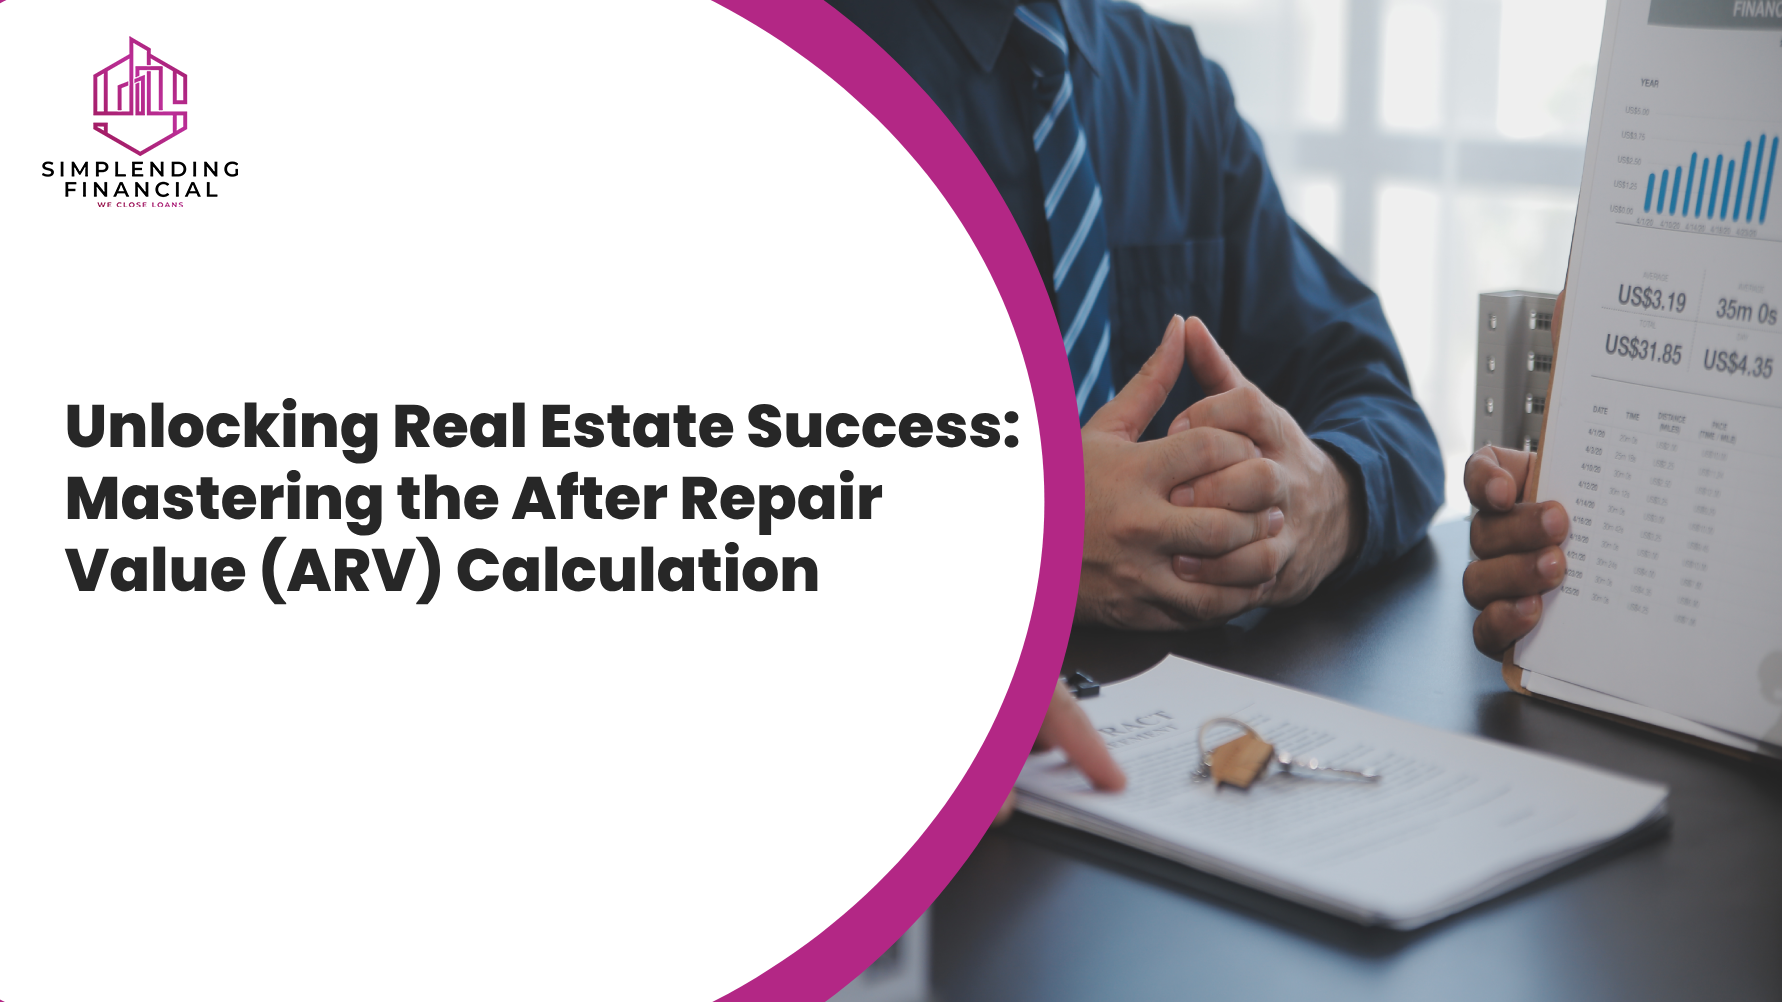 Unlocking Real Estate Success: Mastering the After Repair Value (ARV) Calculation